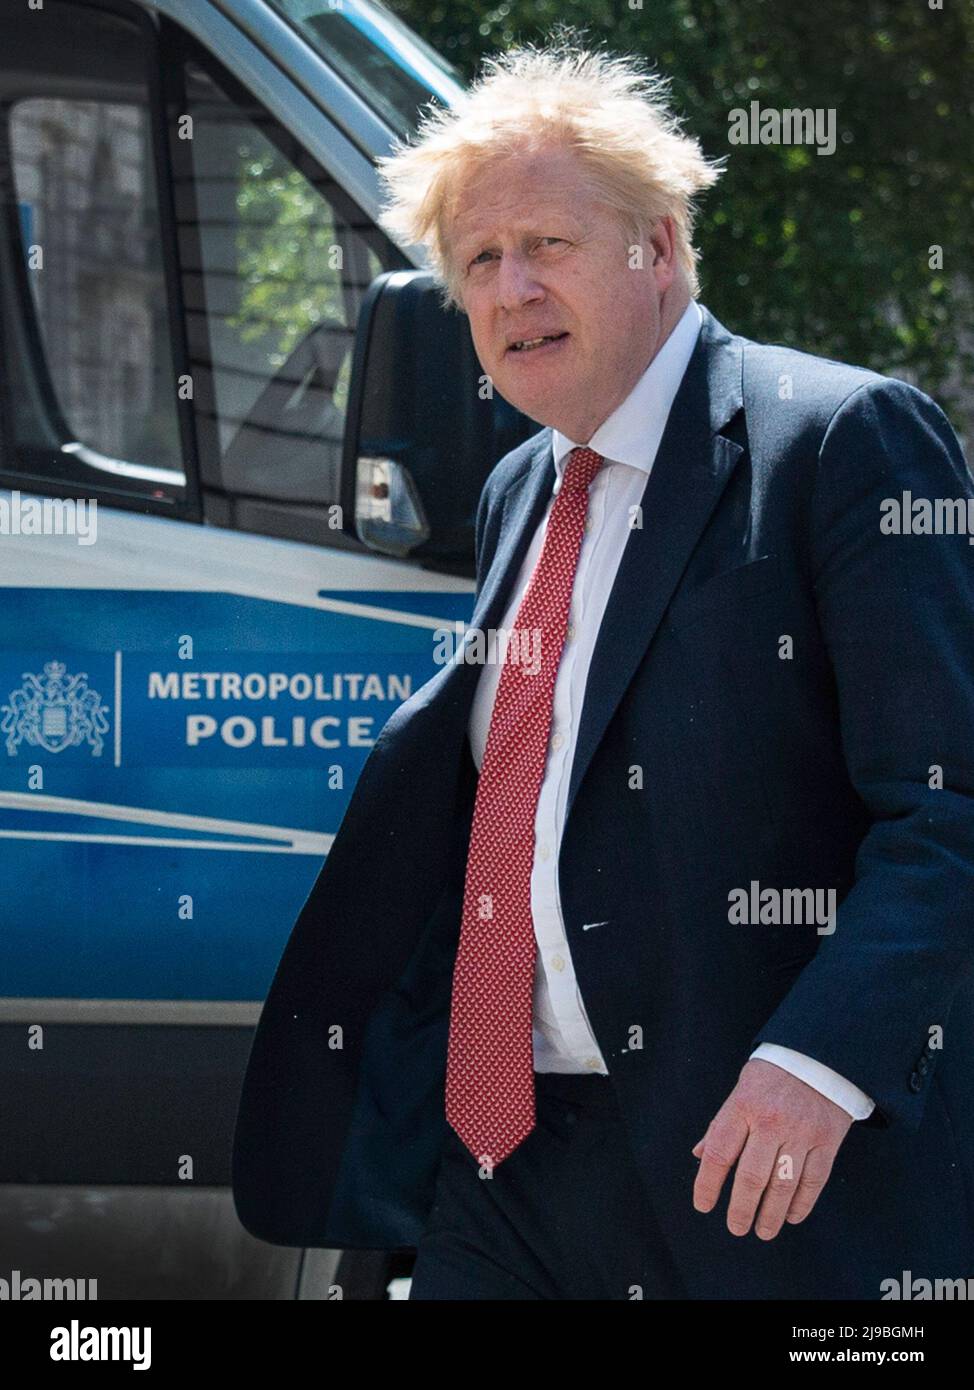 London - 19/05/2022.UK Prime minister Boris Johnson is seen walking past a Metropolitan Police Van, from the Tory Party Head Quarters back to Downing Stock Photo